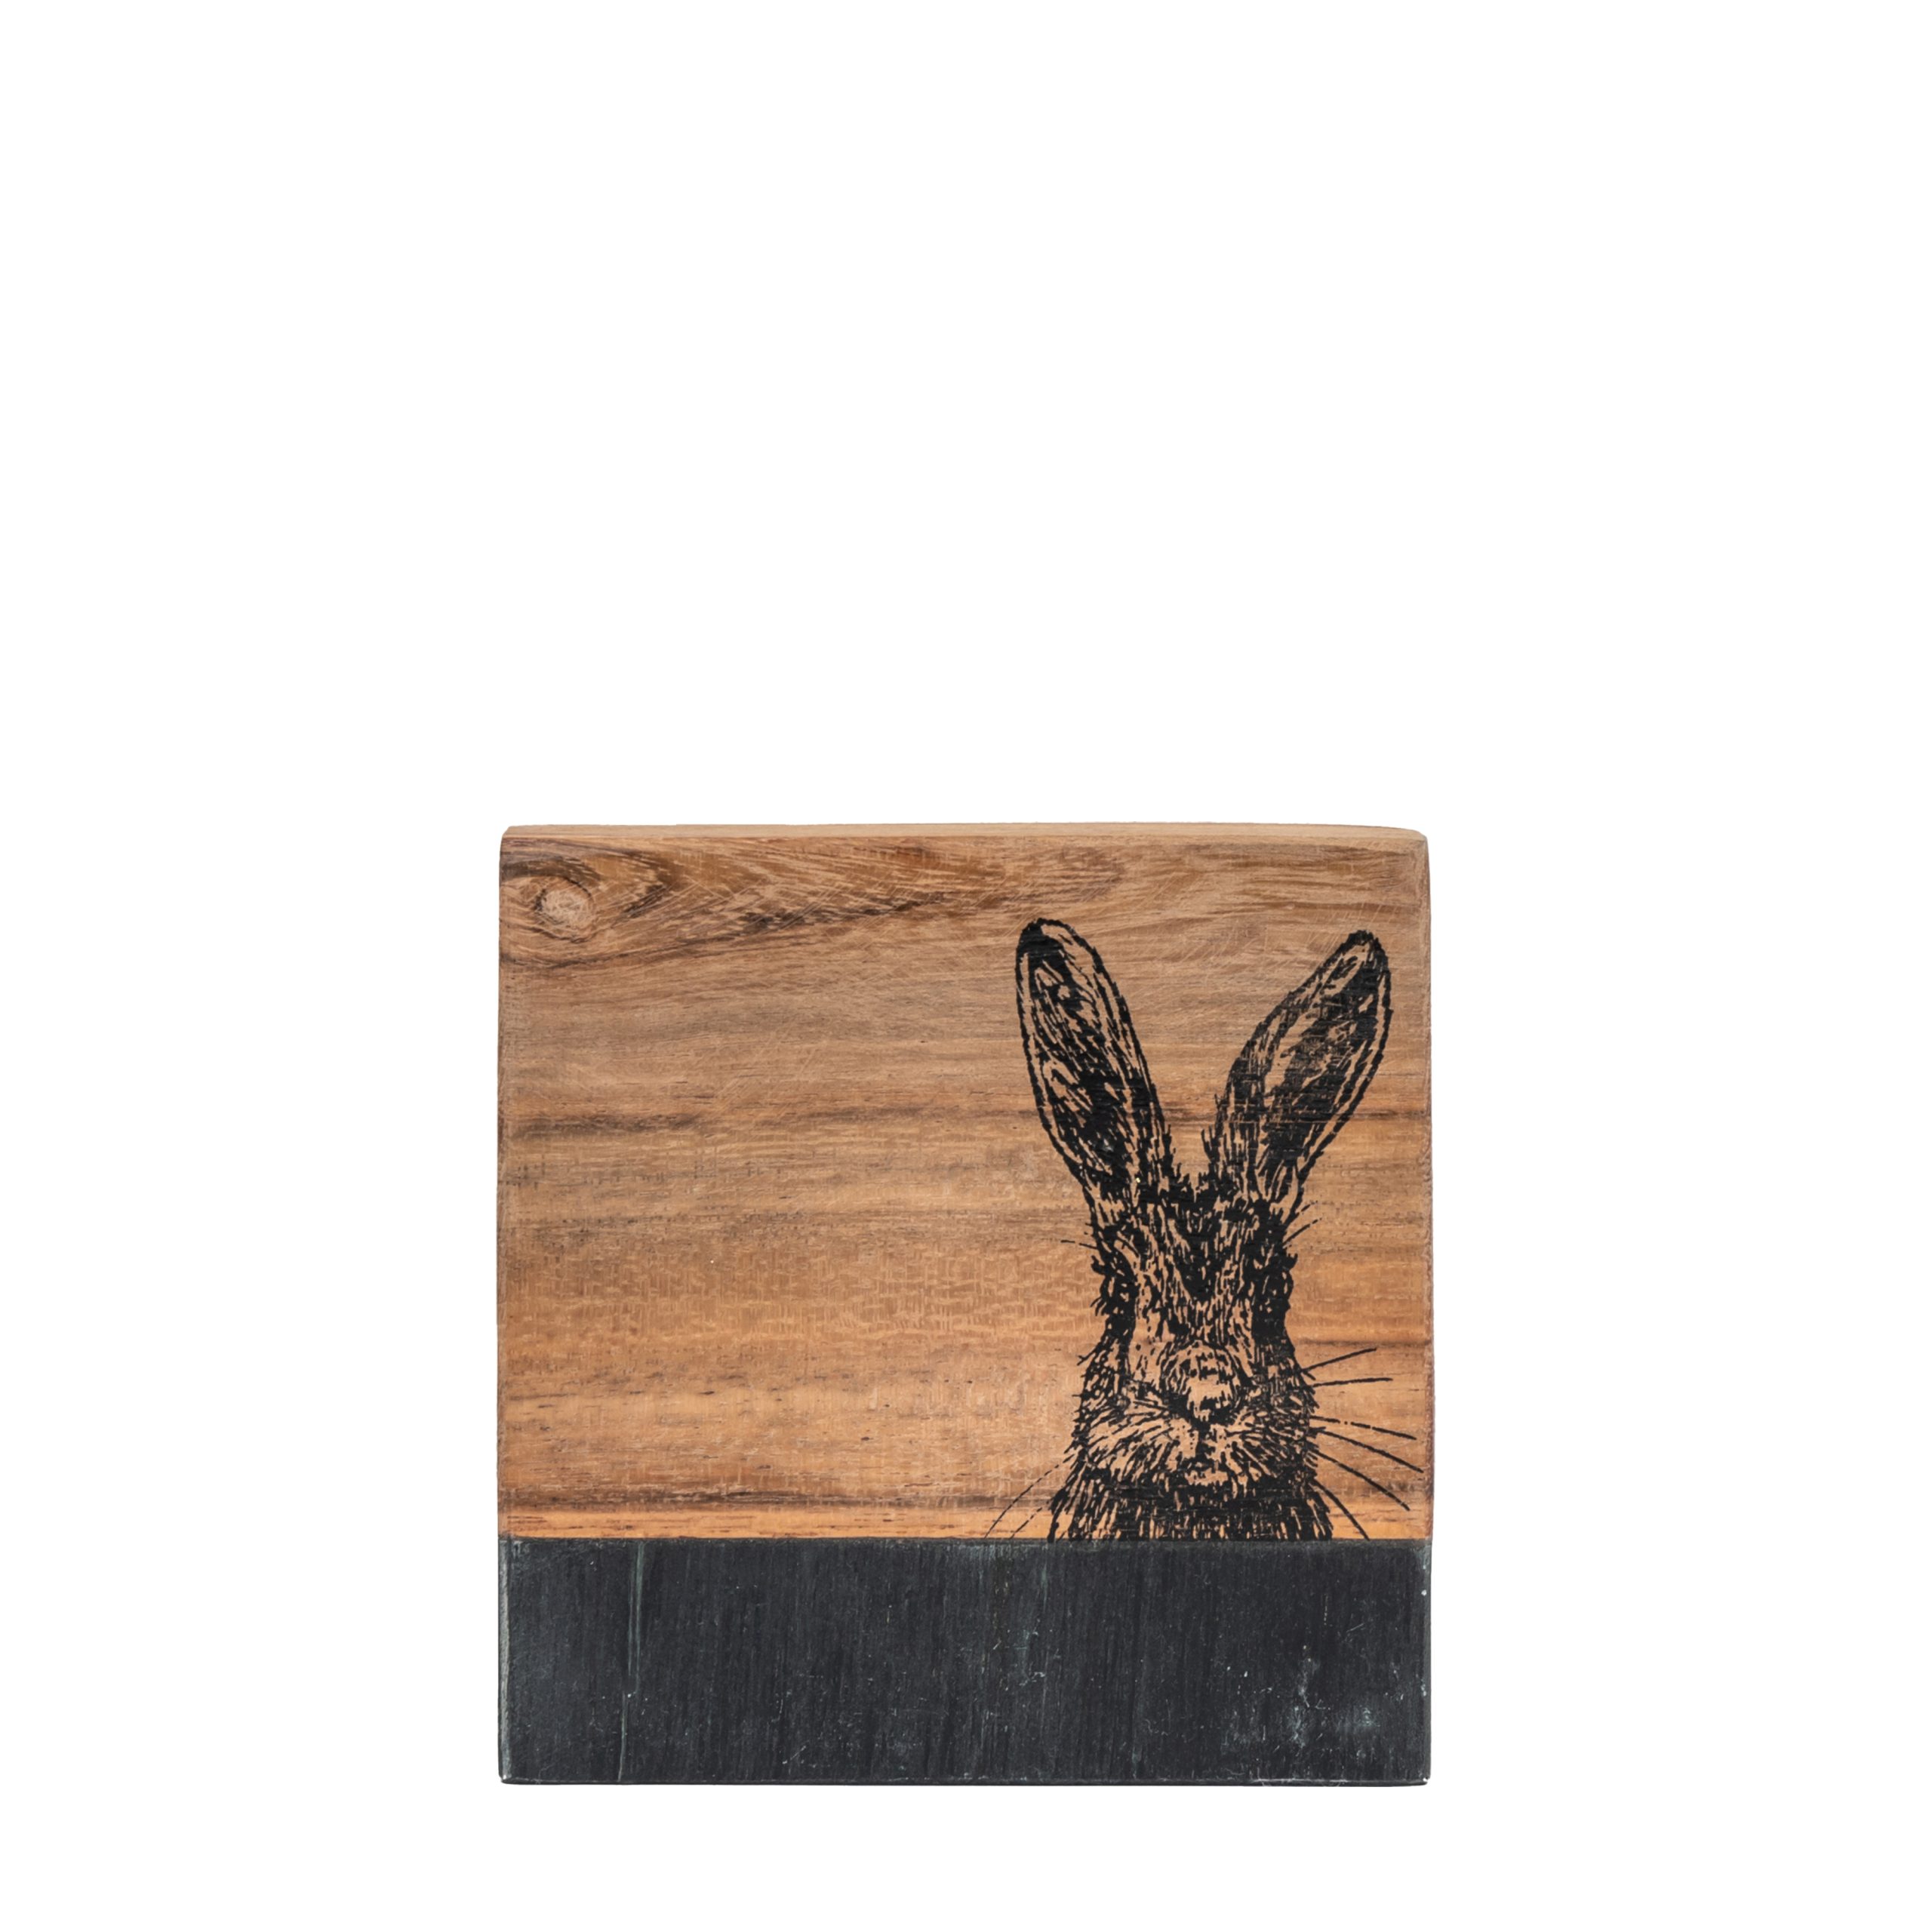 Gallery Direct Hare Coasters Black Marble (Set of 4)